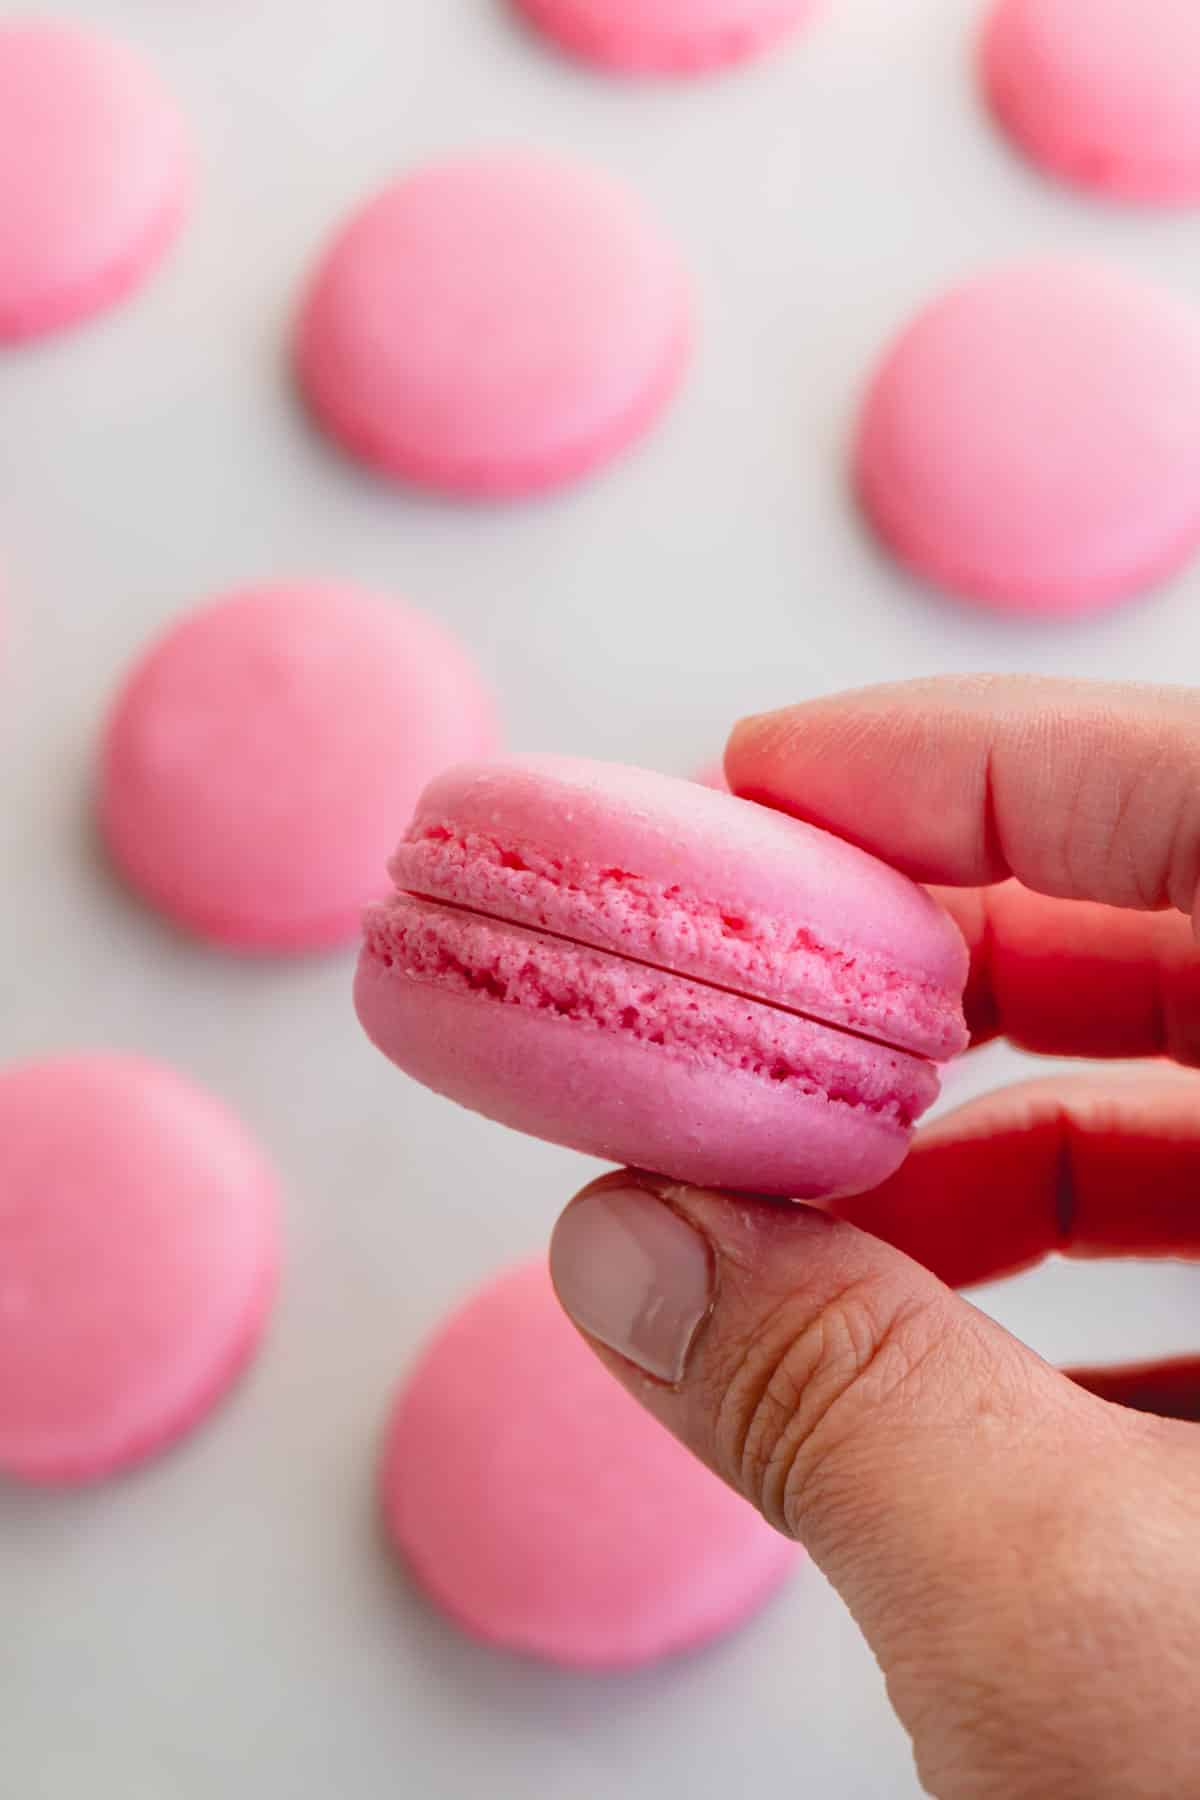 French Macaron Recipe for Beginners ~Sweet & Savory